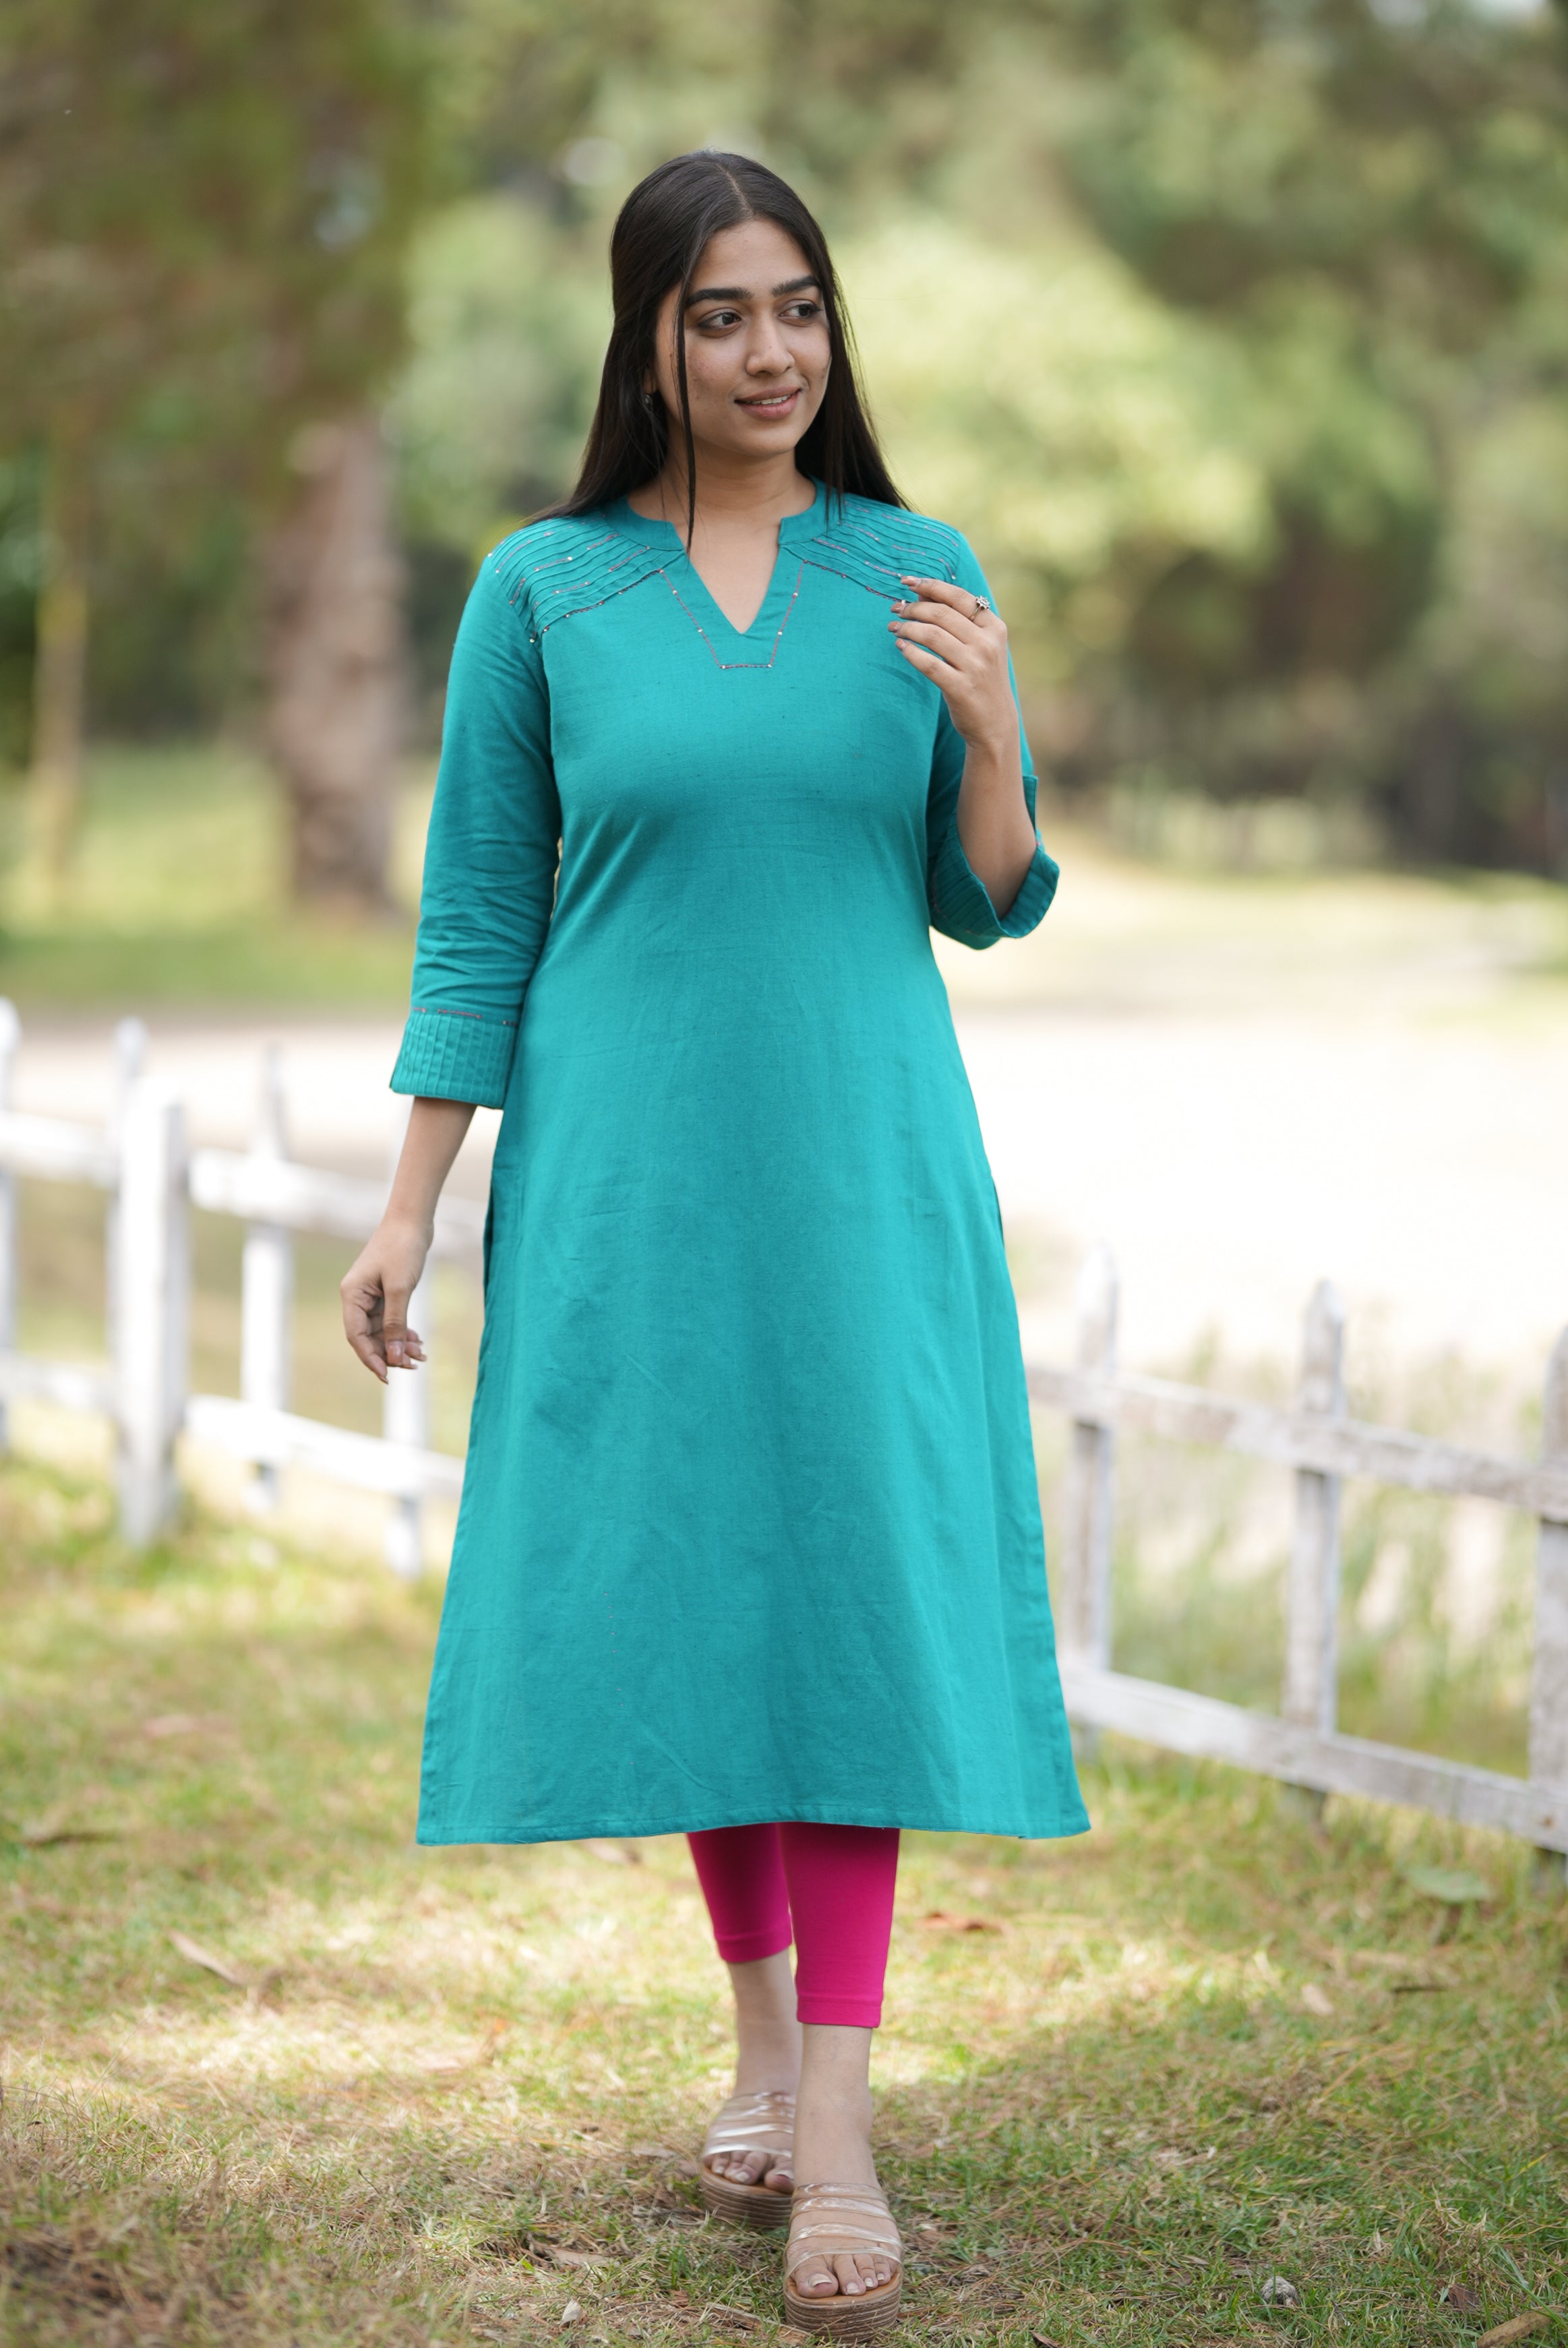 strqaight cut v neck plain green with minimalhand sleeves and shoulder design